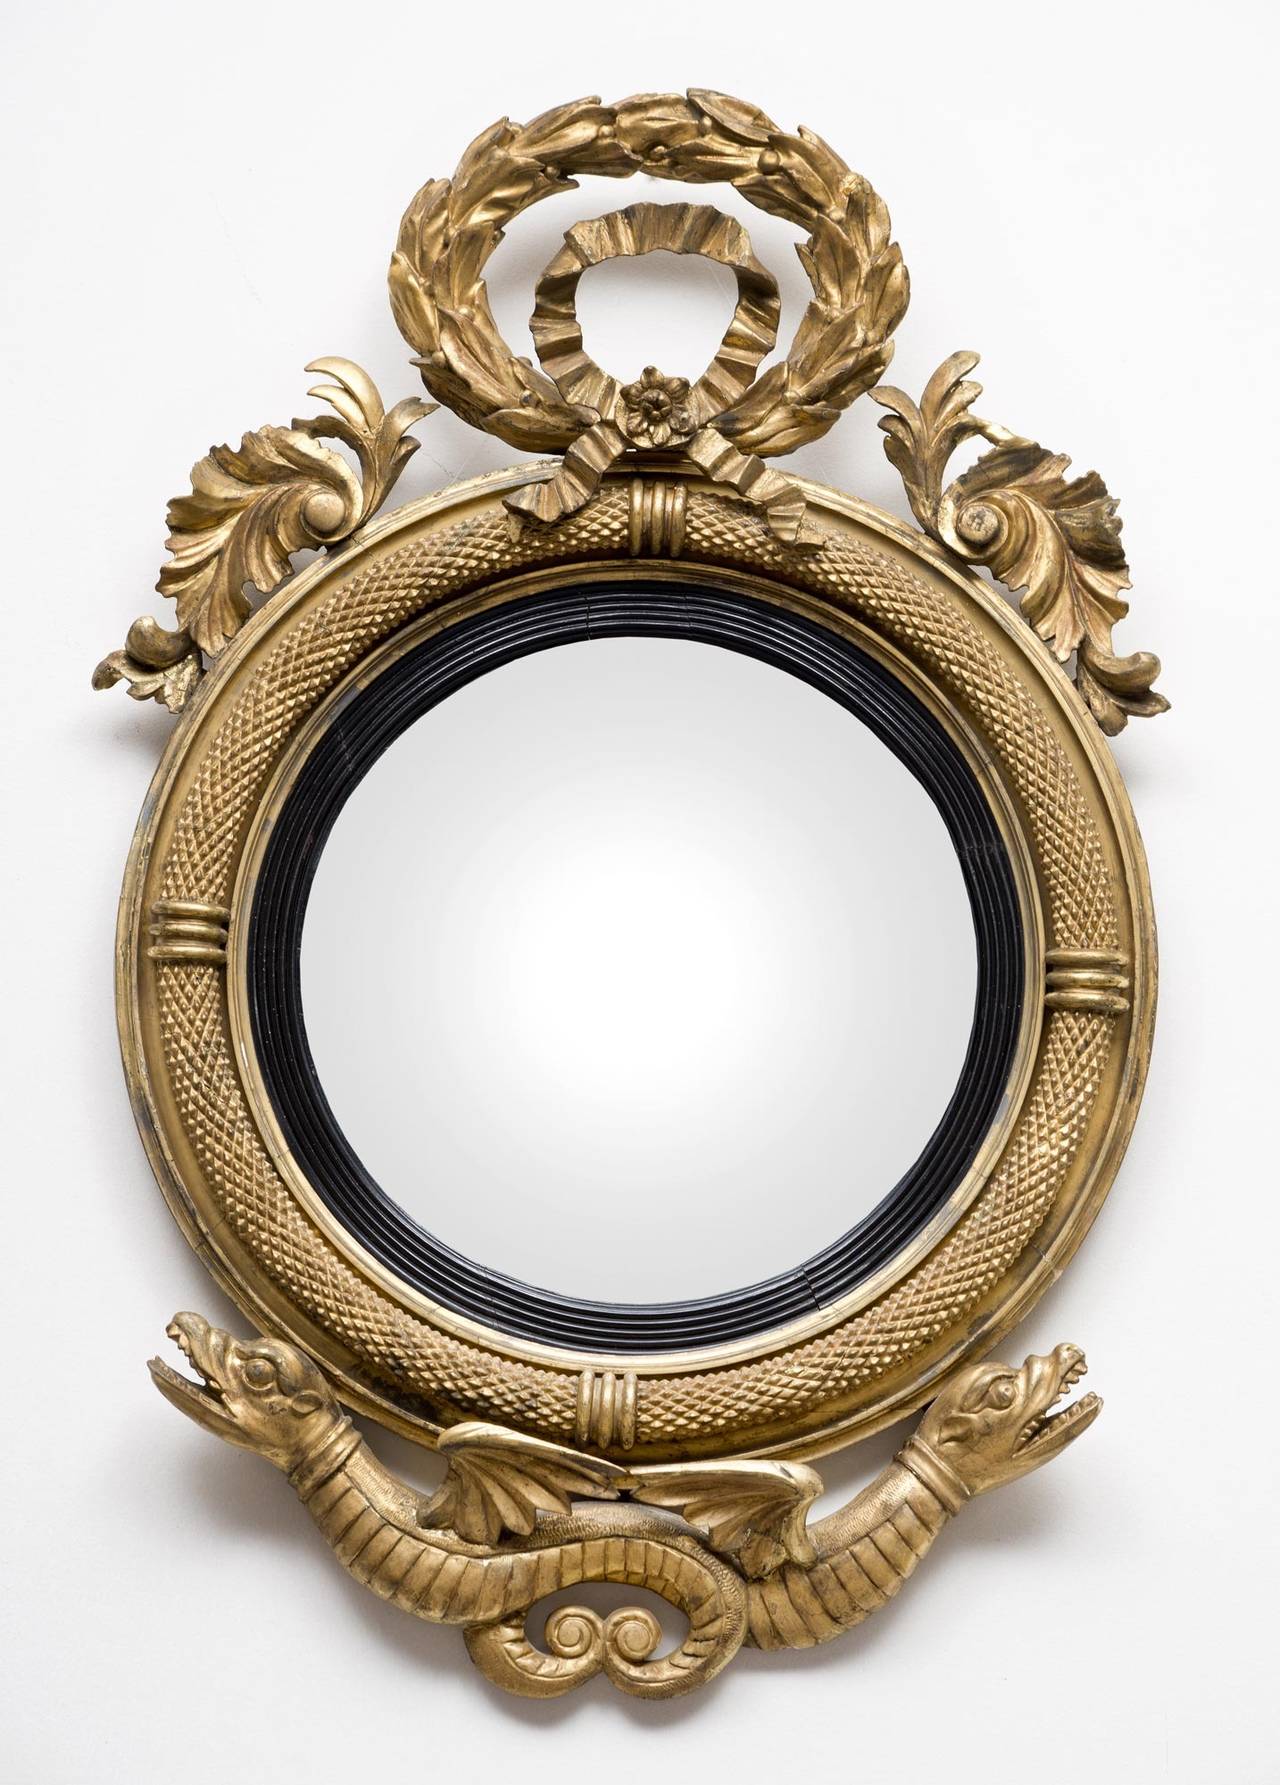 Rare American Federal period giltwood convex mirror, the circular plate and ebonized reeded slip set within a boldly molded frame carved to appear like snake skin, surmounted by a carved laurel wreath and ribboned bow flanked by stylized leaves. The